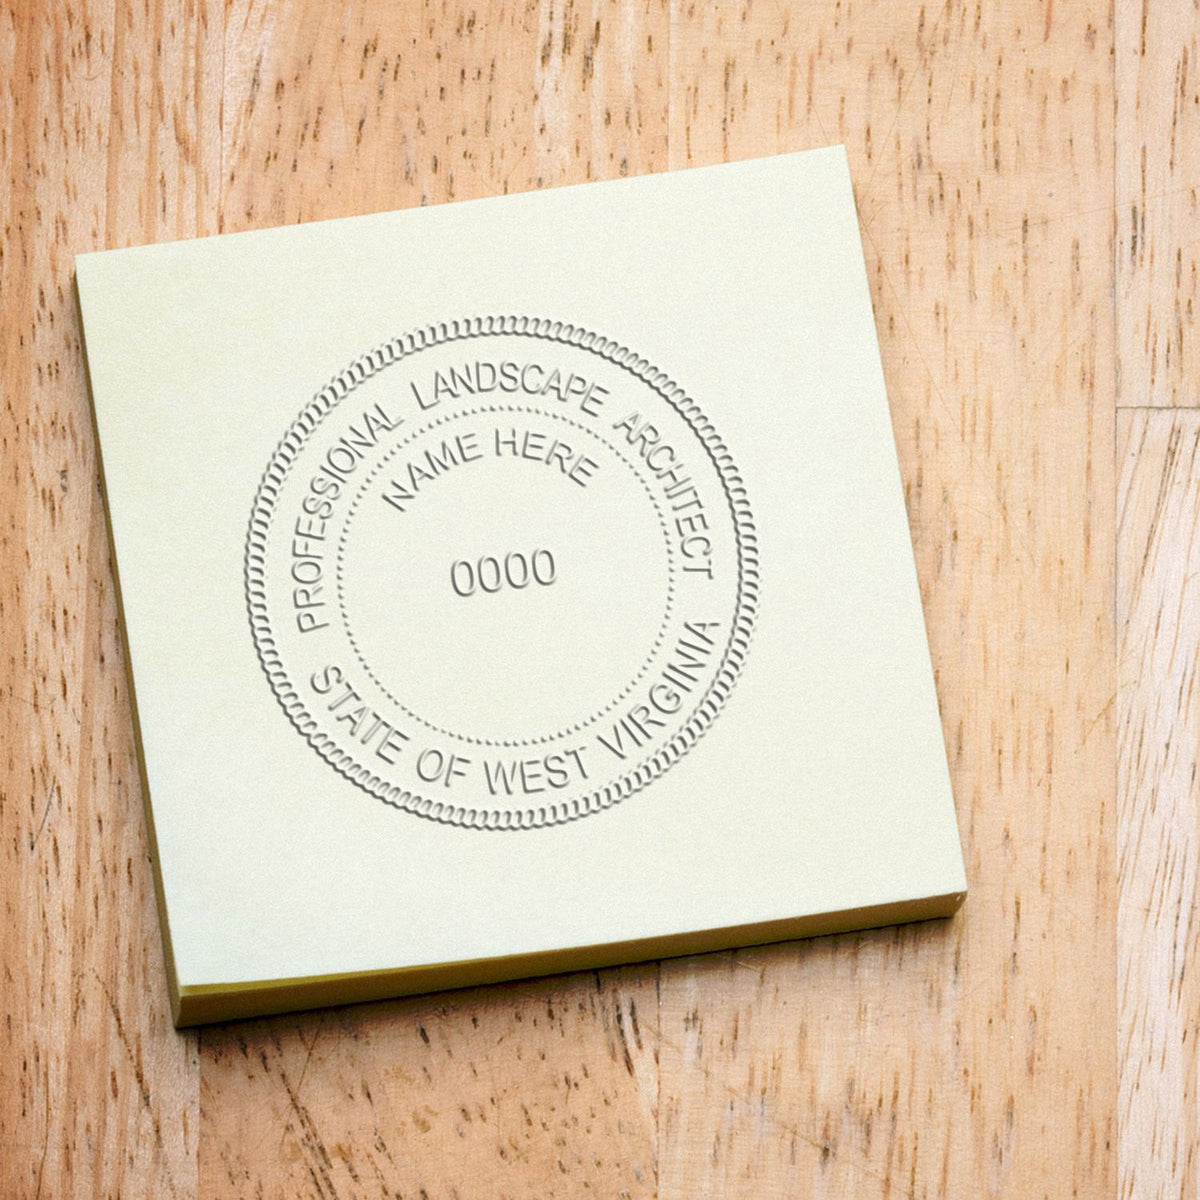 An alternative view of the Gift West Virginia Landscape Architect Seal stamped on a sheet of paper showing the image in use